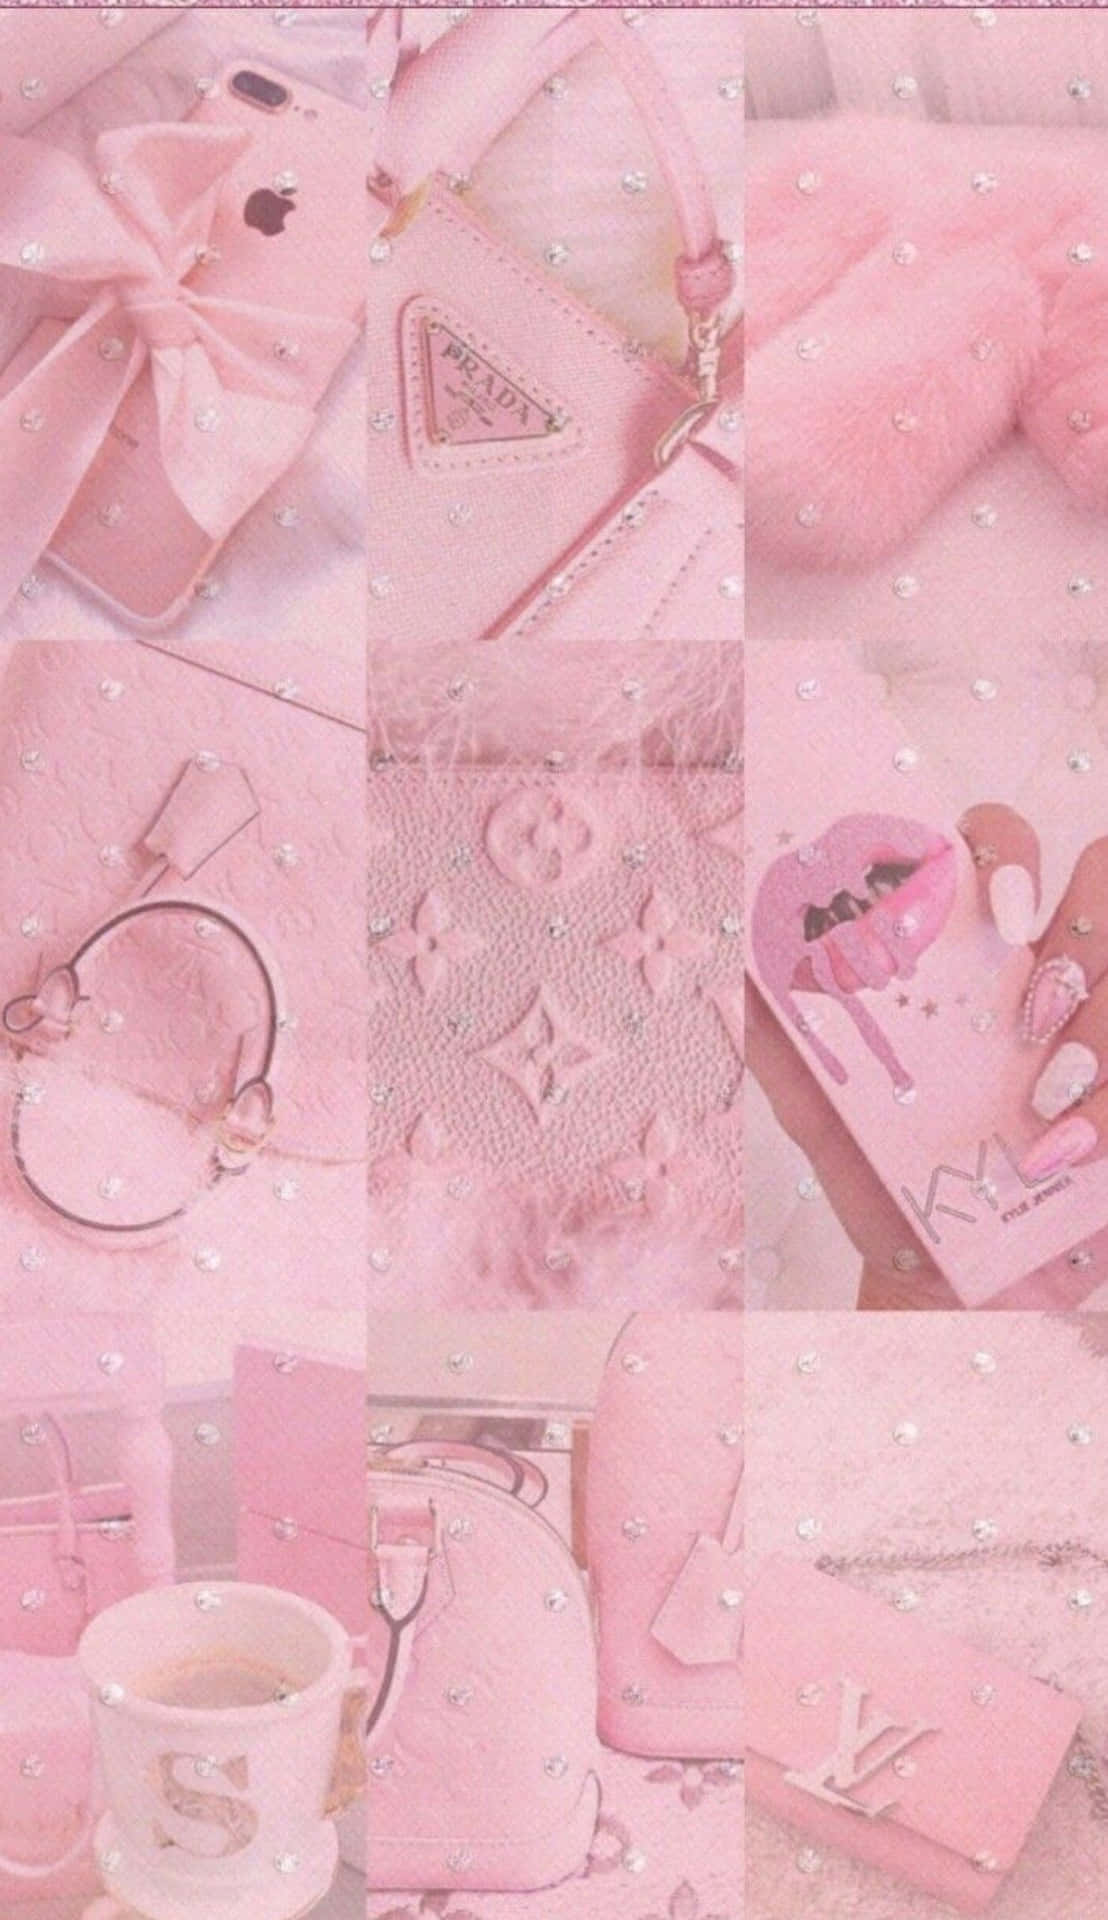 Aesthetic Pink Collage Of Designers Bags Background